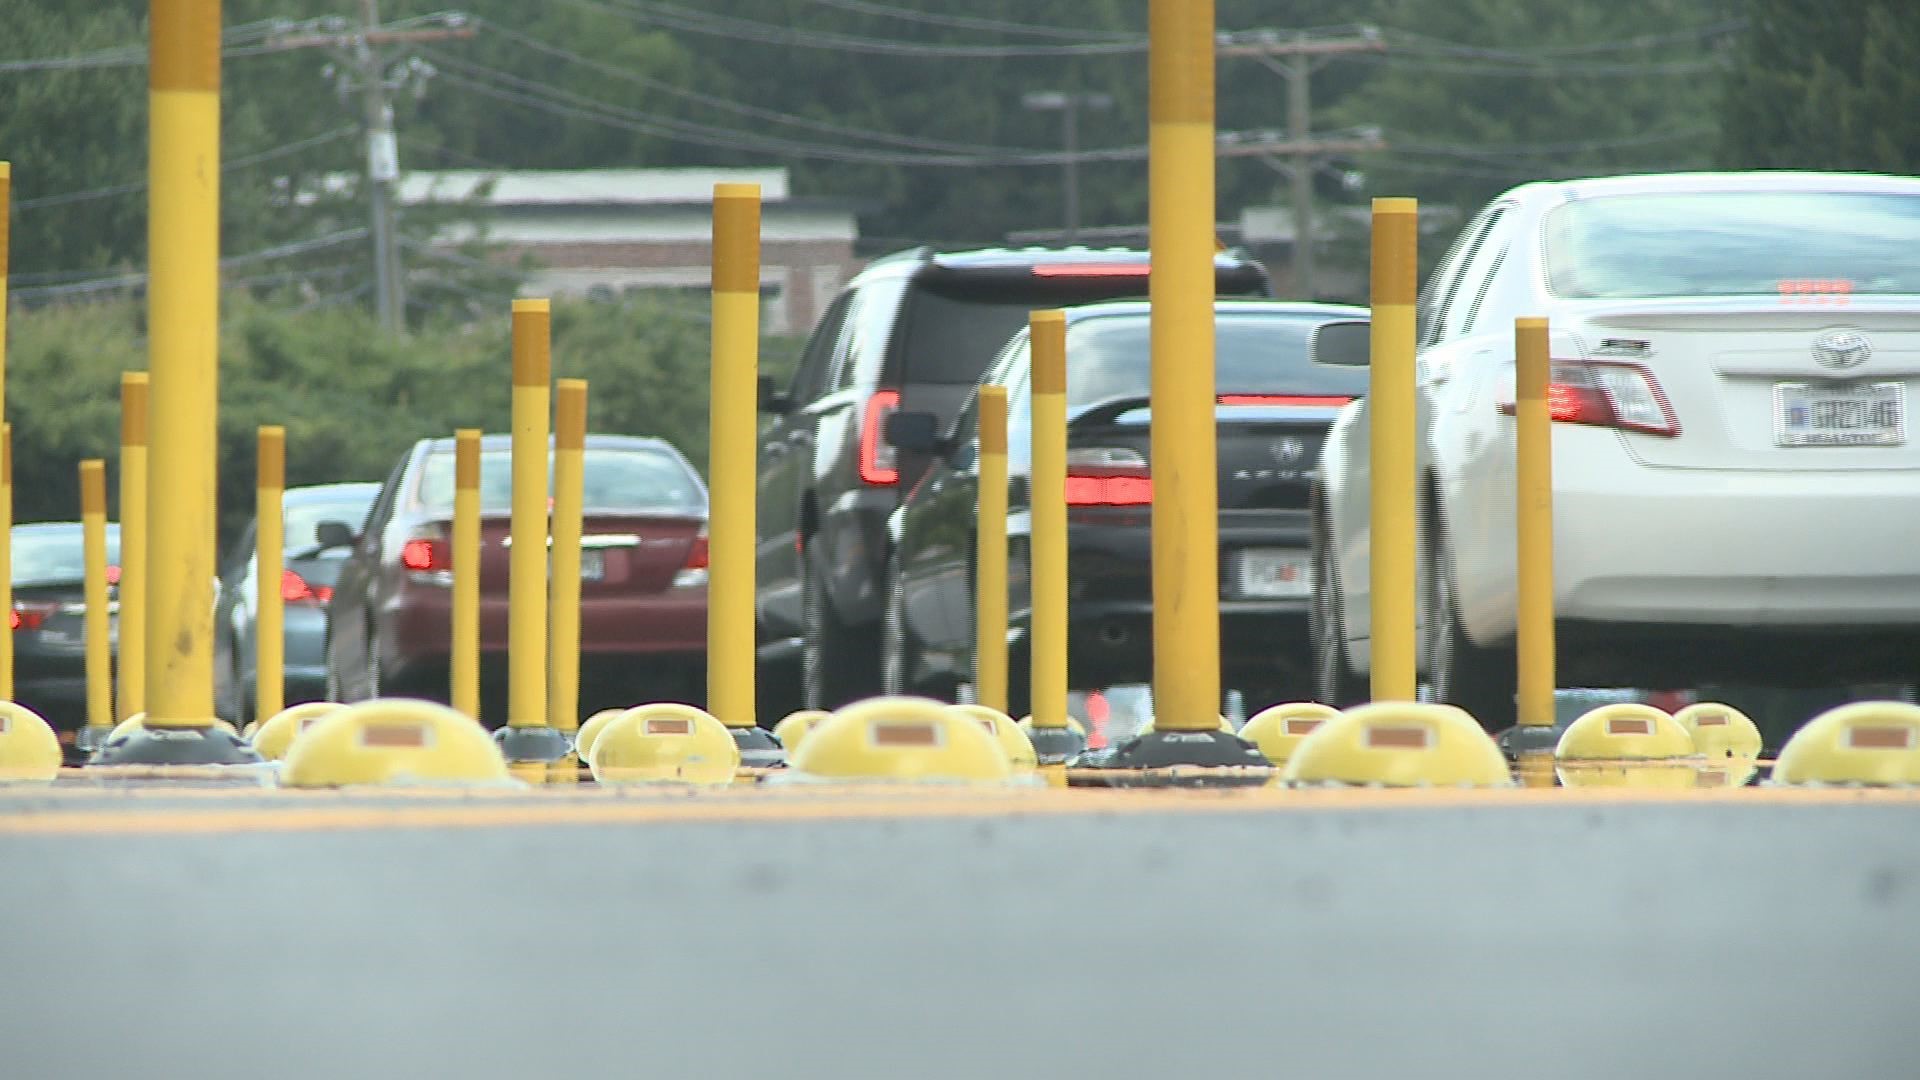 Alpharetta drivers prepare for significant traffic changes coming on Monday as the transportation department closes Kimball Bridge to begin its replacement project.